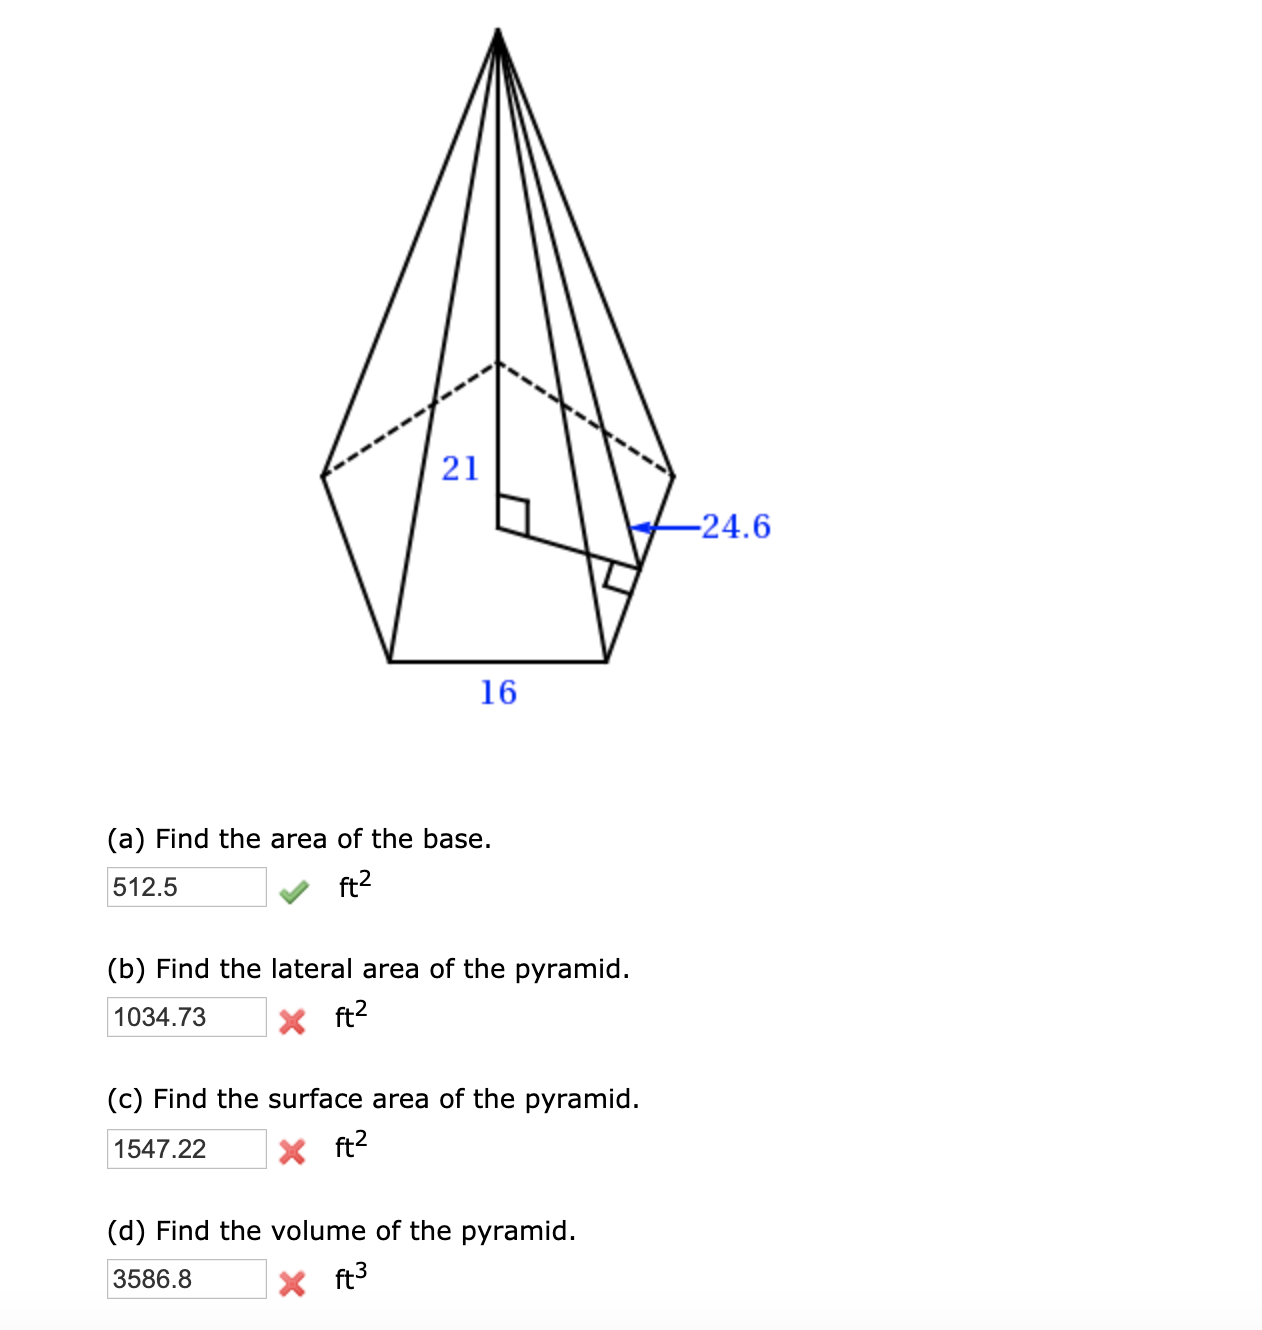 21
-24.6
16
(a) Find the area of the base.
512.5
ft2
(b) Find the lateral area of the pyramid.
1034.73
X ft?
(c) Find the surface area of the pyramid.
1547.22
X ft2
(d) Find the volume of the pyramid.
3586.8
X ft3
